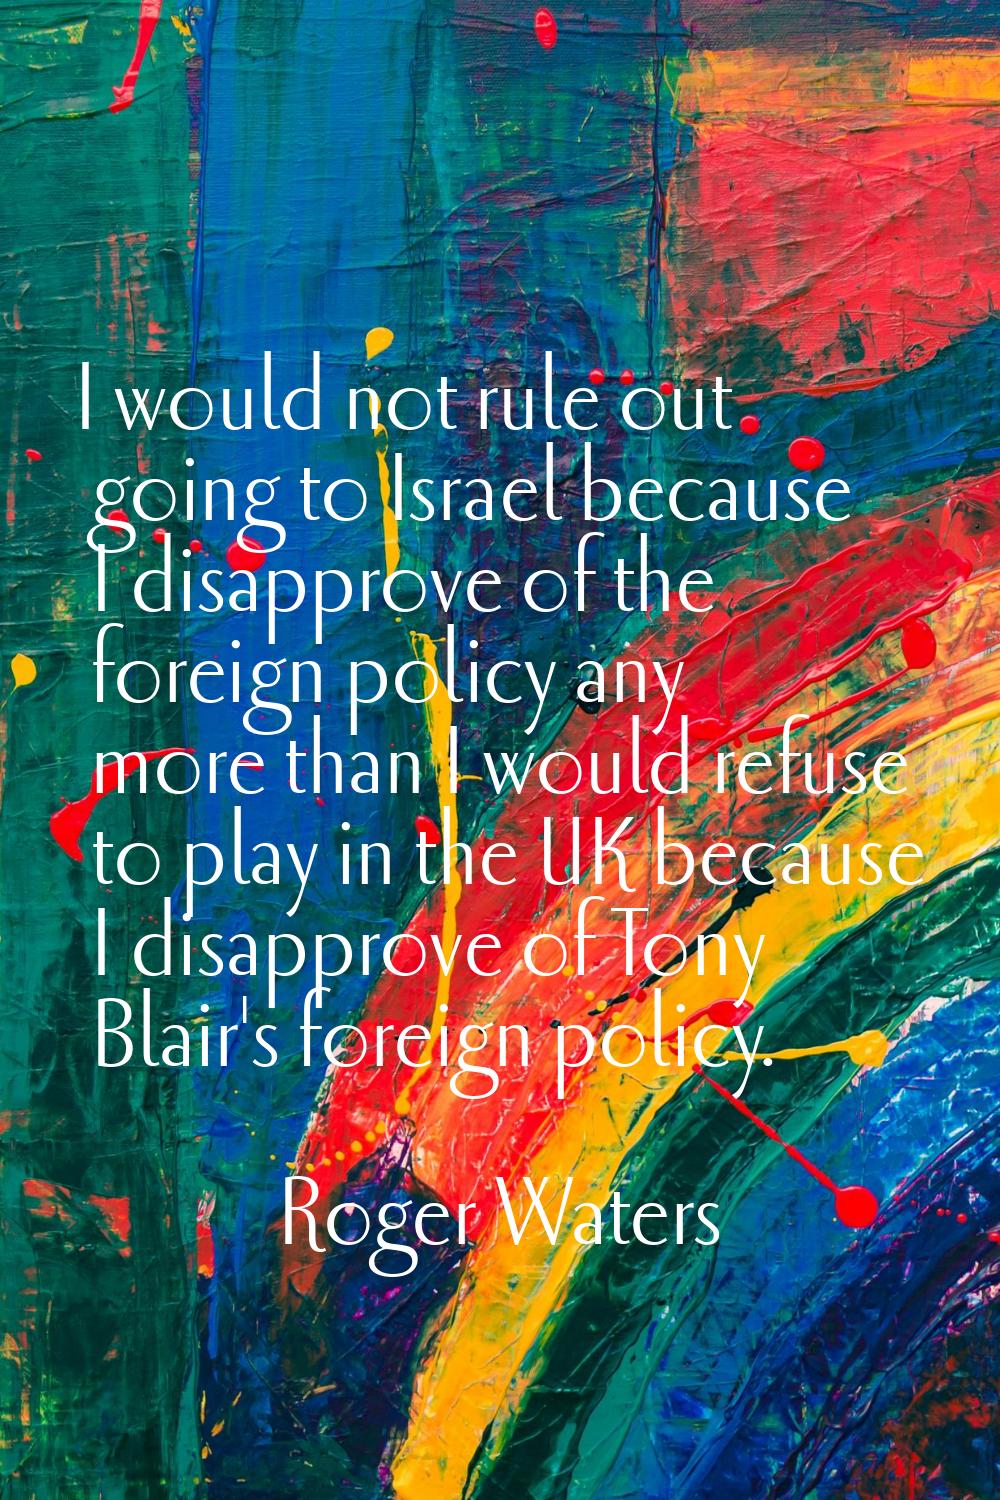 I would not rule out going to Israel because I disapprove of the foreign policy any more than I wou